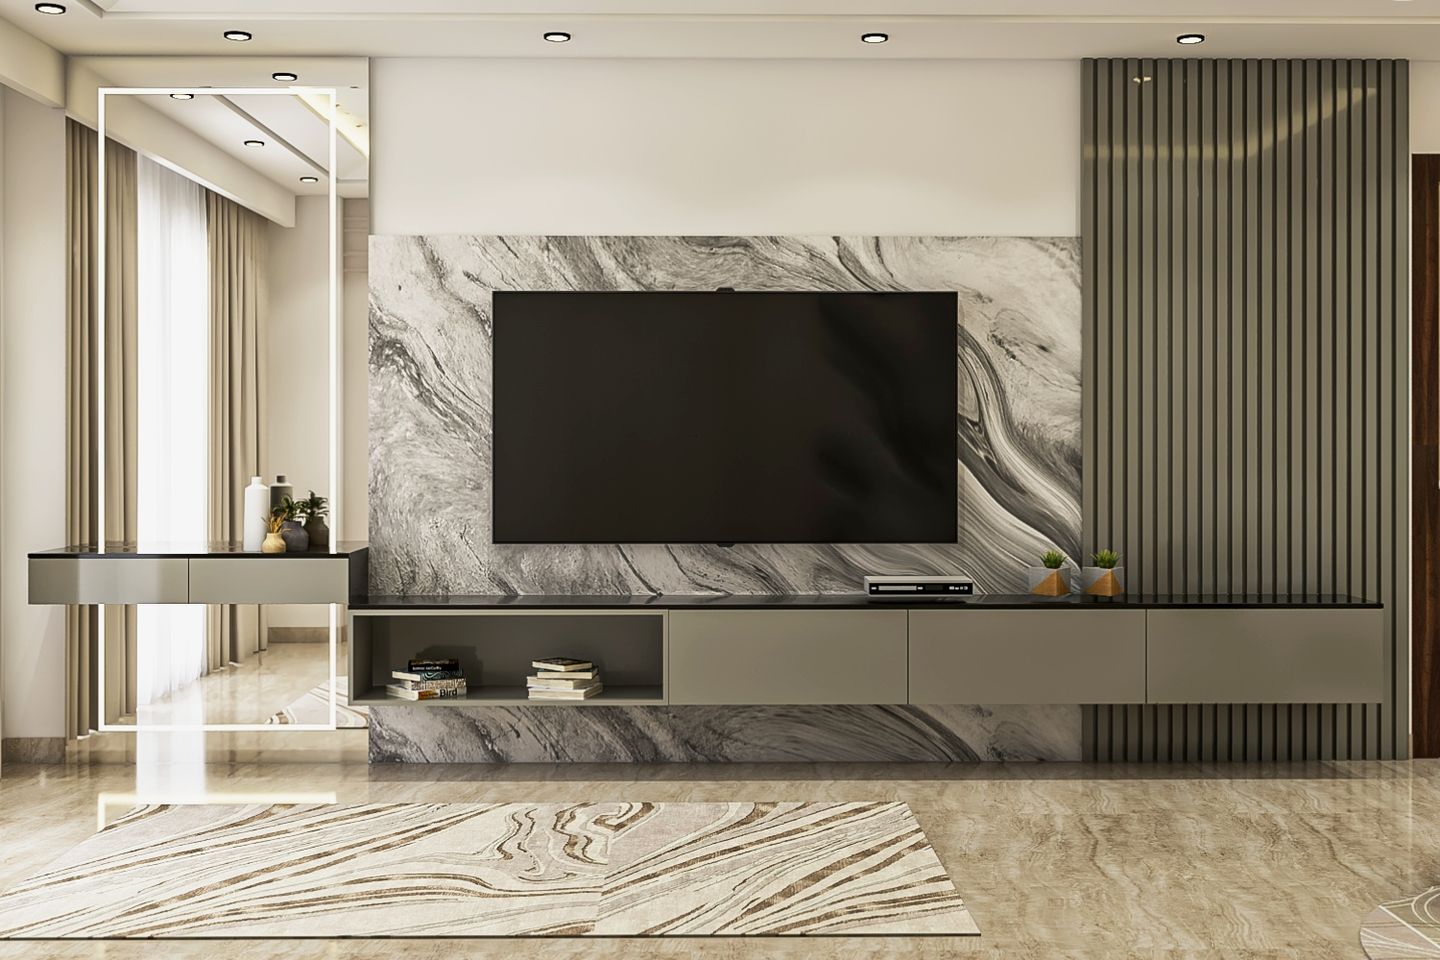 14x12 Ft Contemporary Dove Grey TV Unit Design with Wall-Mounted Cabinet and Open Storage - Livspace